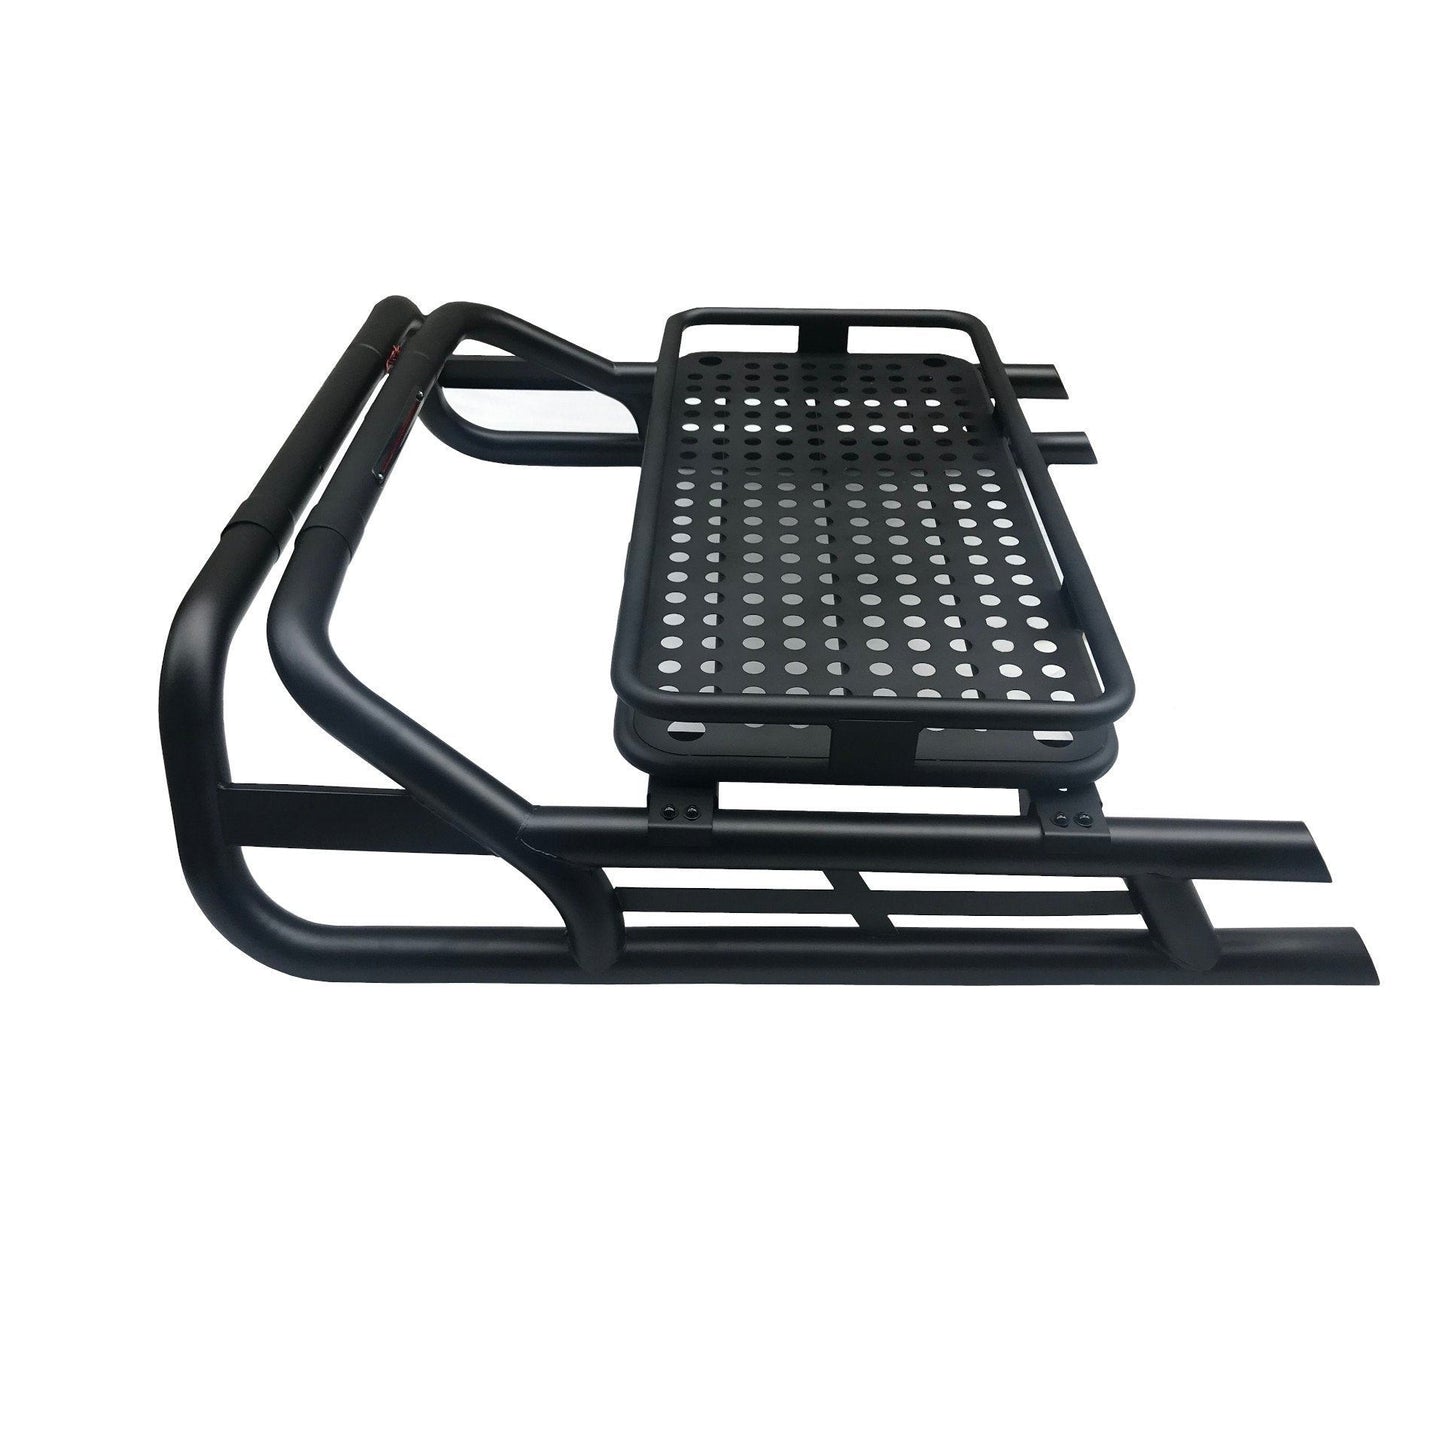 Black SUS201 Long Arm Roll Bar with Cargo Basket Rack for the Renault Alaskan